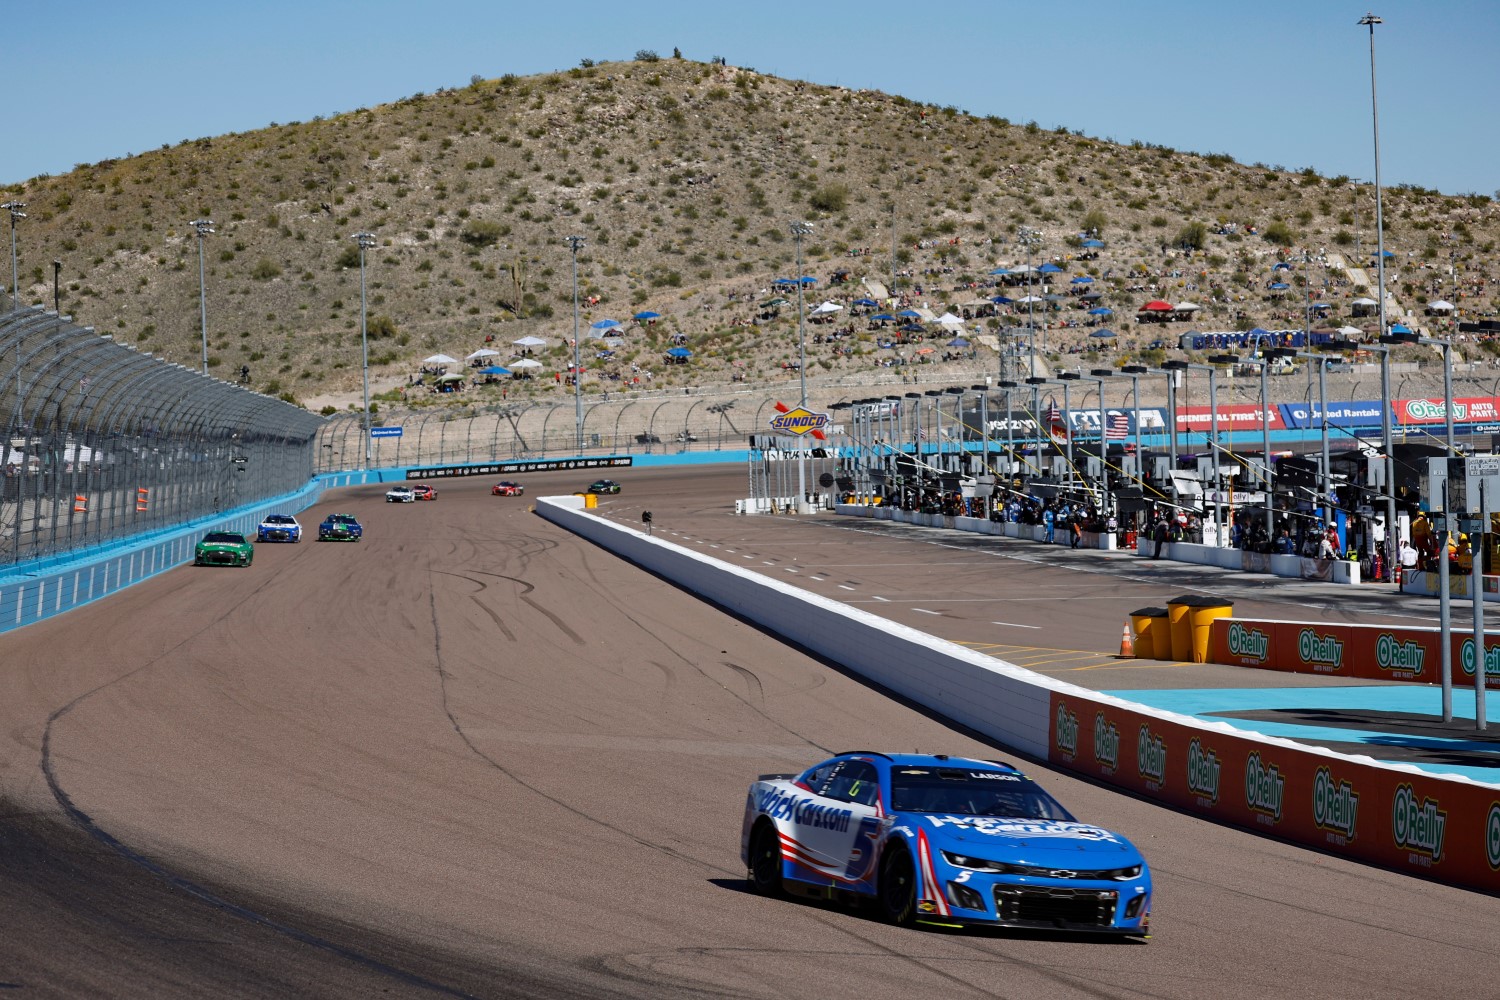 Kyle Larson, driver of the #5 HendrickCars.com Chevrolet, drives during the NASCAR Cup Series United Rentals Work United 500 at Phoenix Raceway on March 12, 2023 in Avondale, Arizona. (Photo by Chris Graythen/Getty Images)